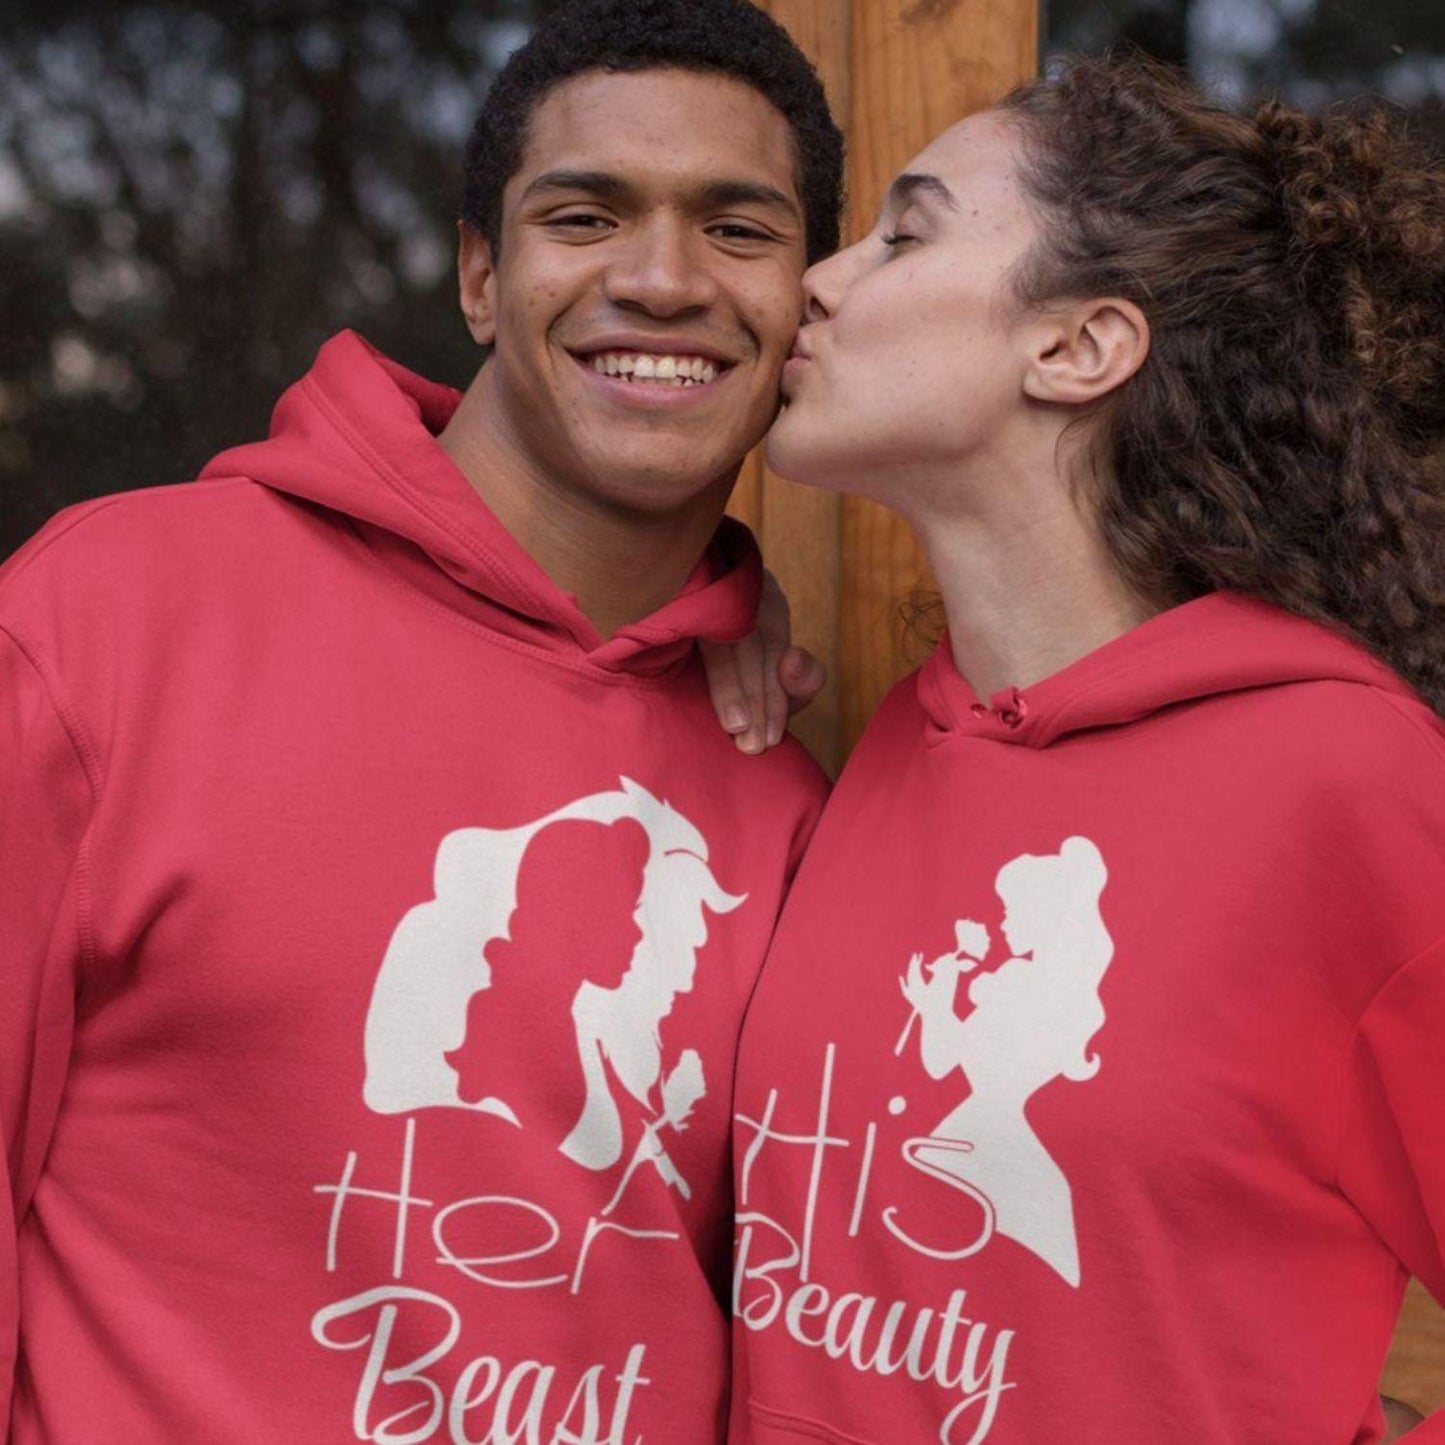 Romantic Matching Set: My Heart Beats for Her/Him Couple Gifts Hoodies